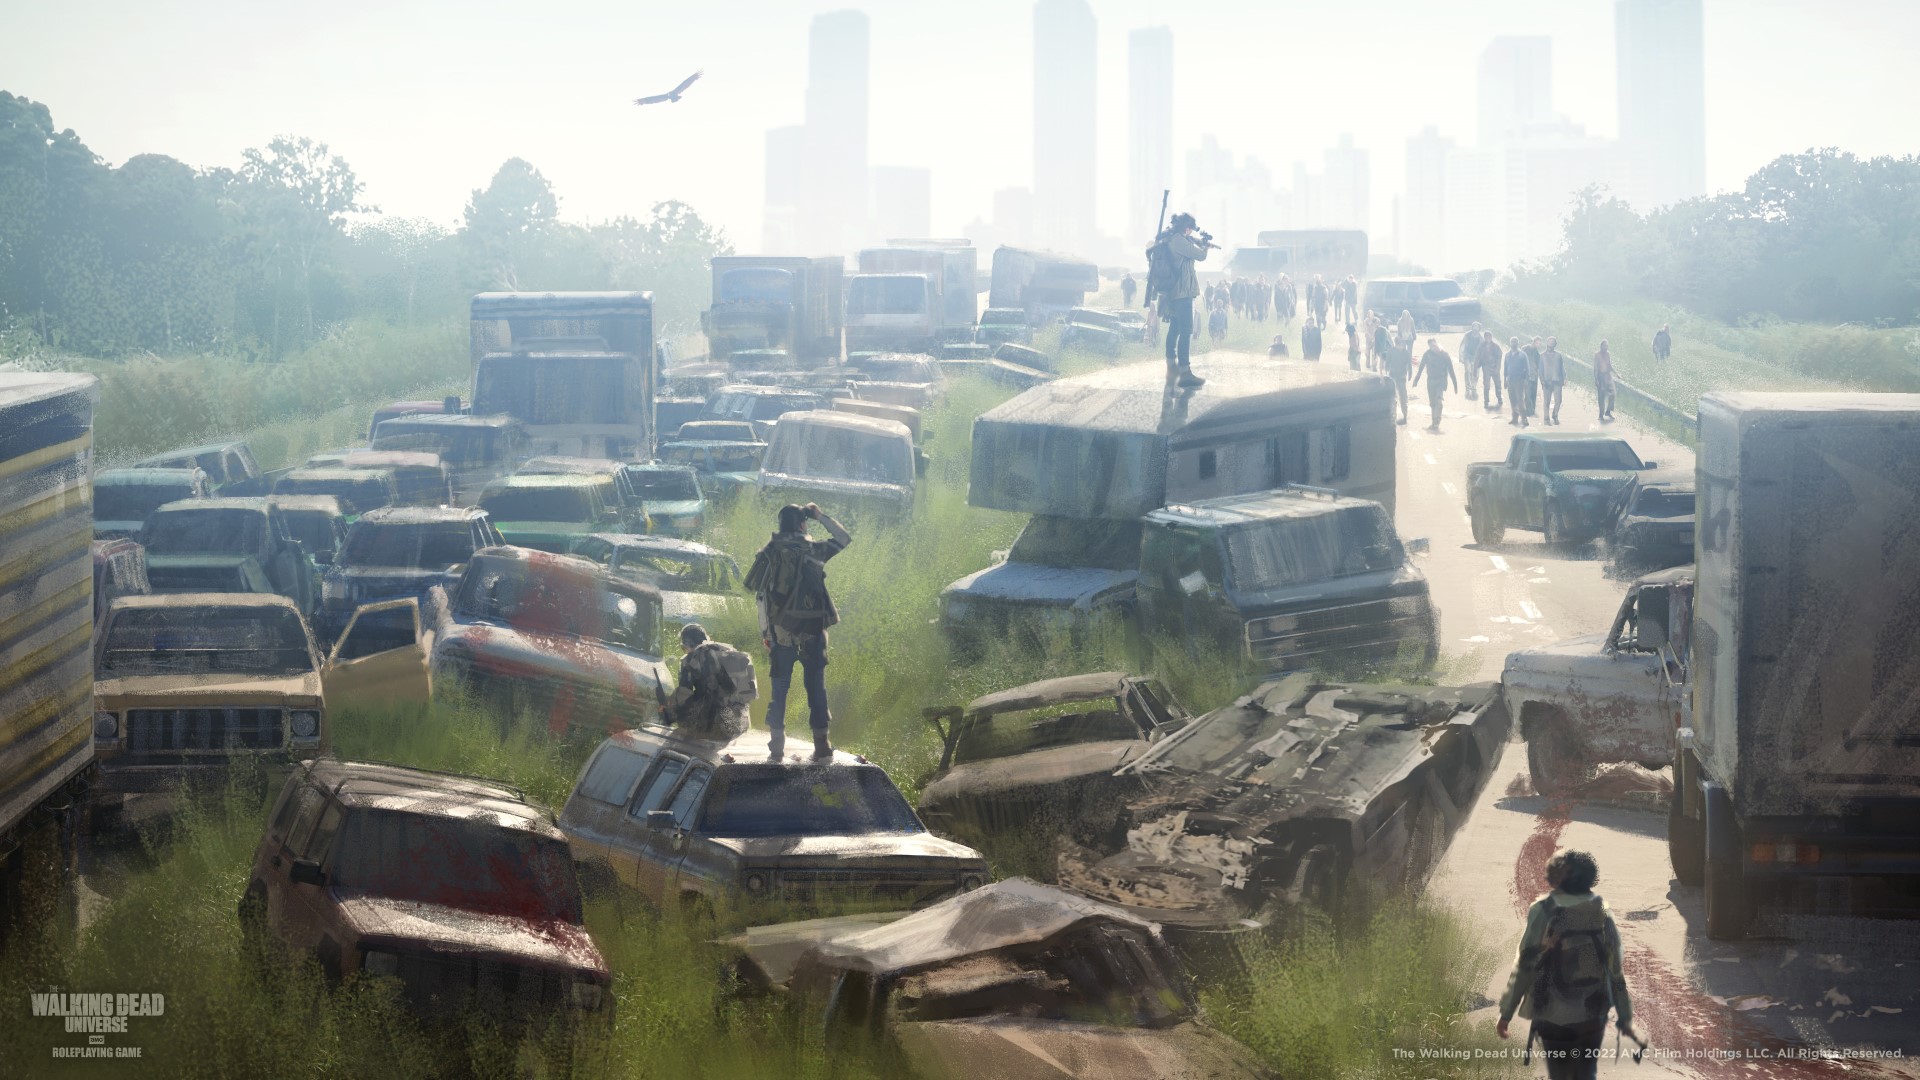 Free League Publishing art of The Walking Dead RPG, showing a pile-up of cars